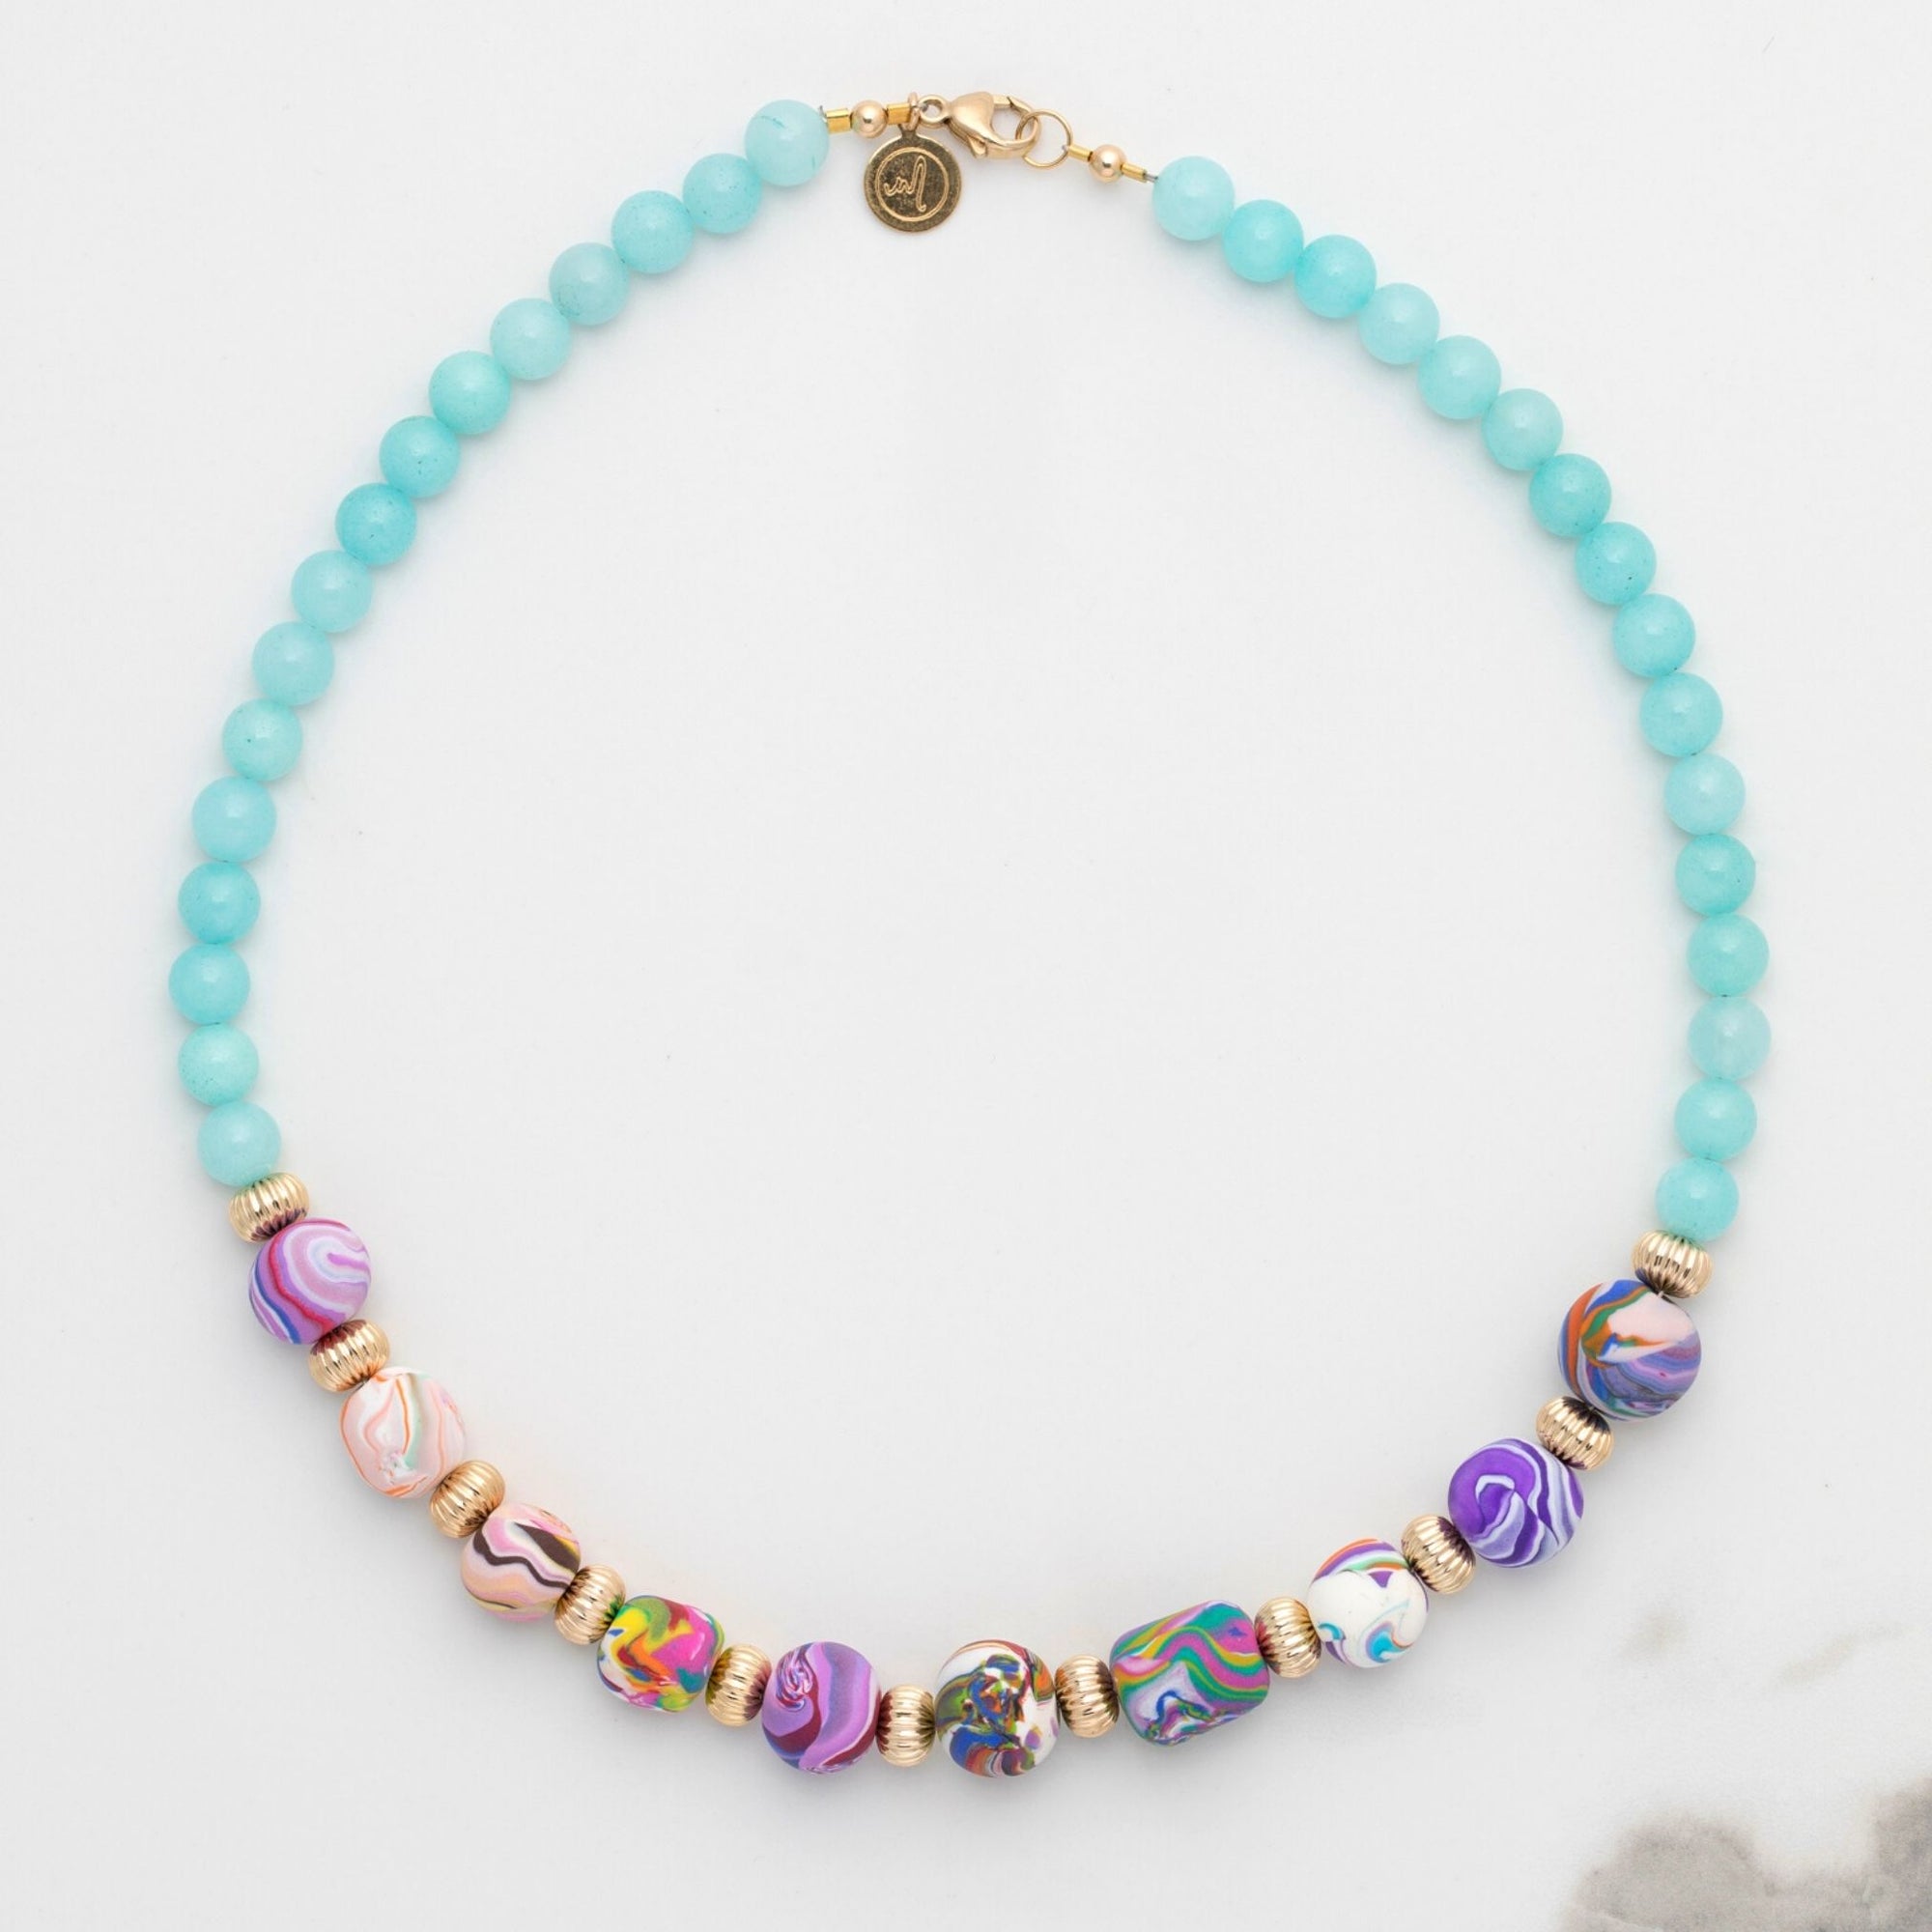 SHOP Necklaces with Marina-ra Handmade Beads and Gemstones